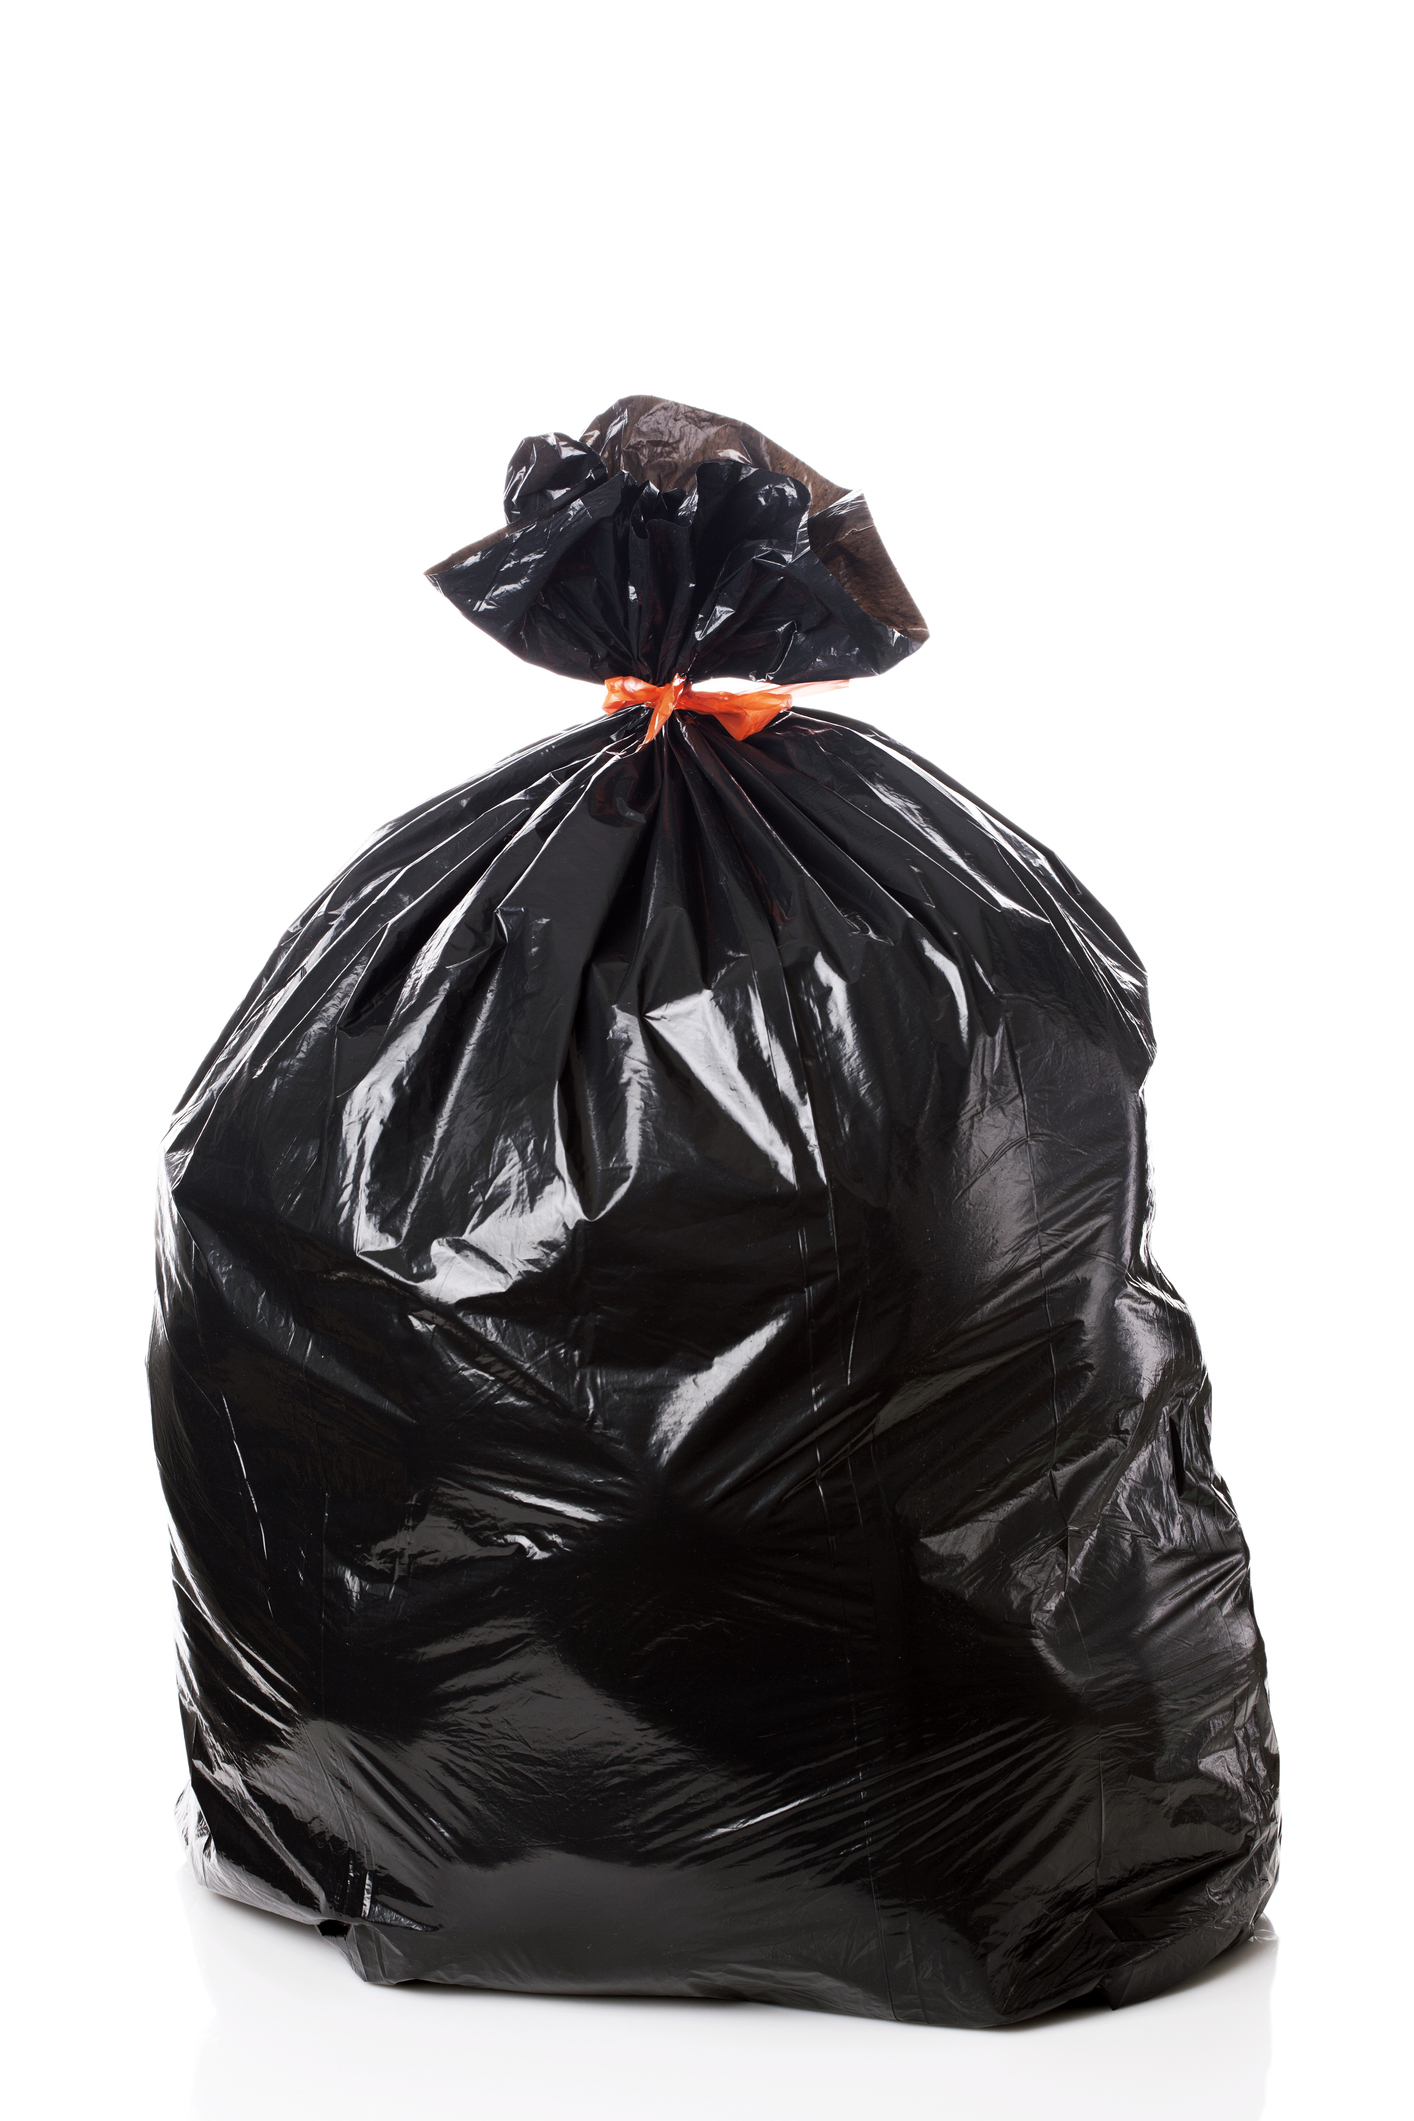 A sealed black trash bag tied with a red band, isolated on a white background